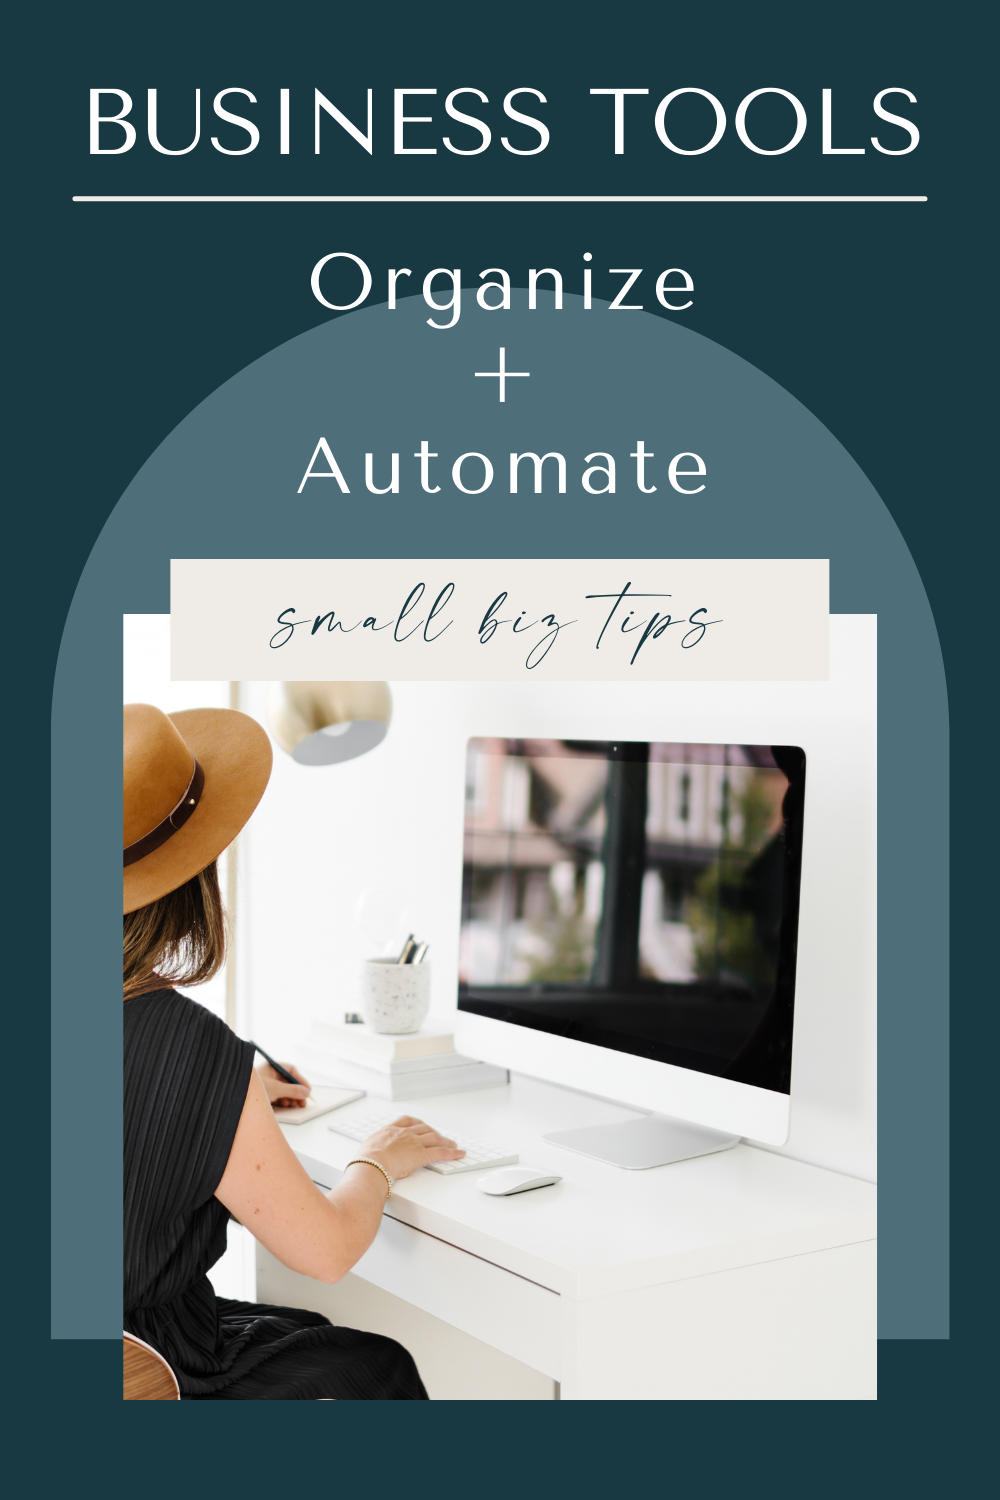 Organize and automate your business using these 5 tools iammichellegifford.com.